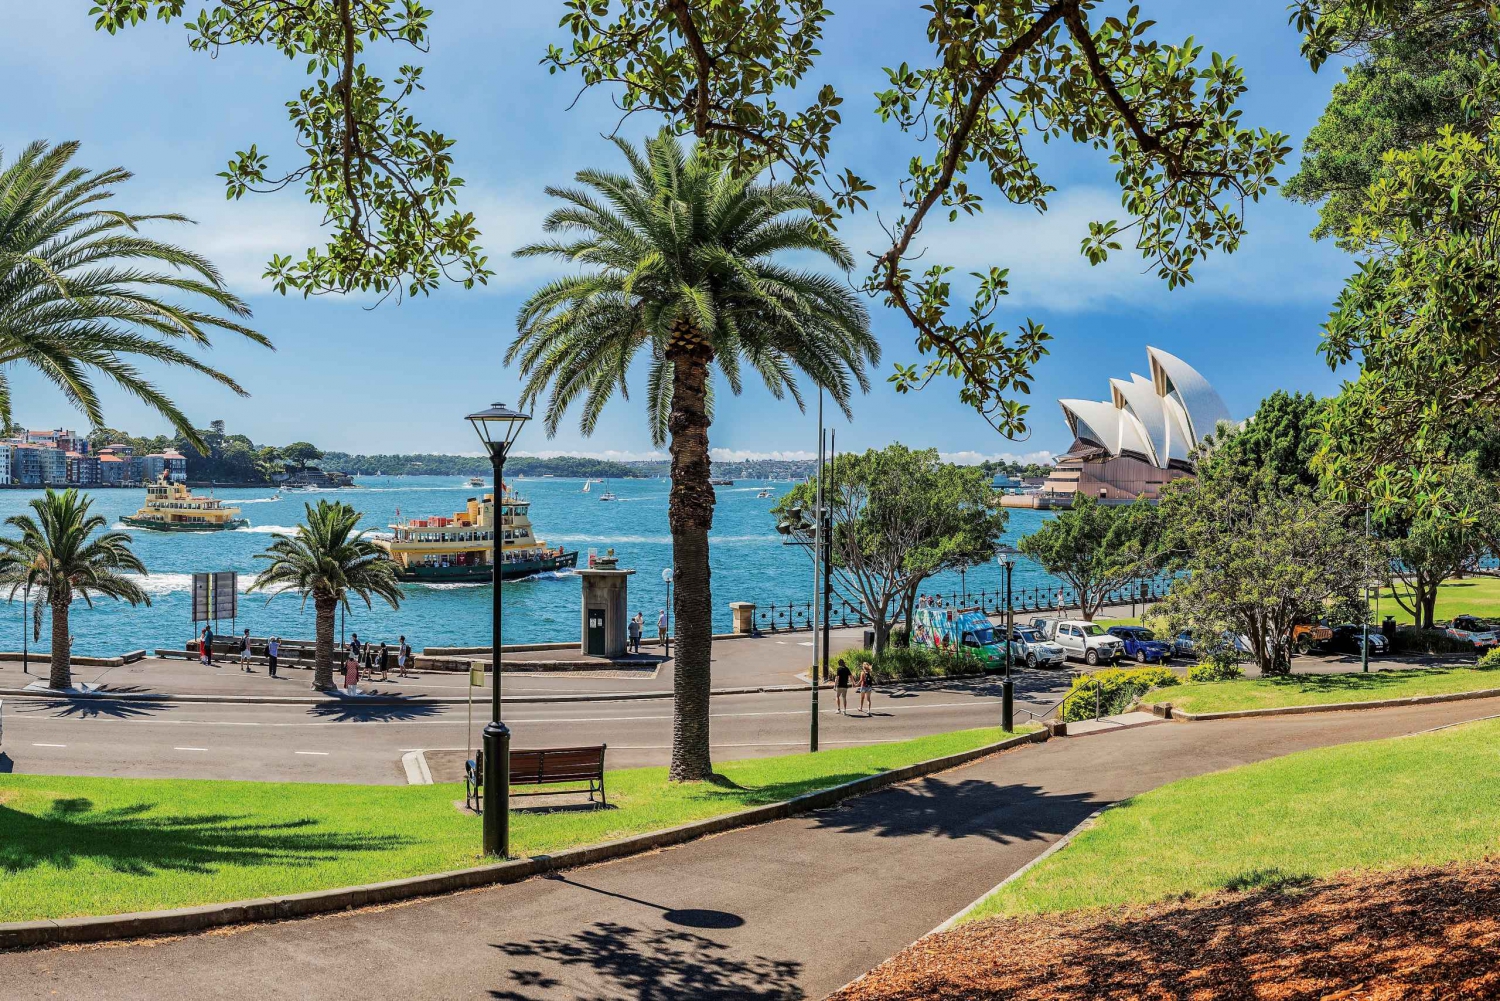 Sydney: See Sydney in Style Guided Private Day Tour